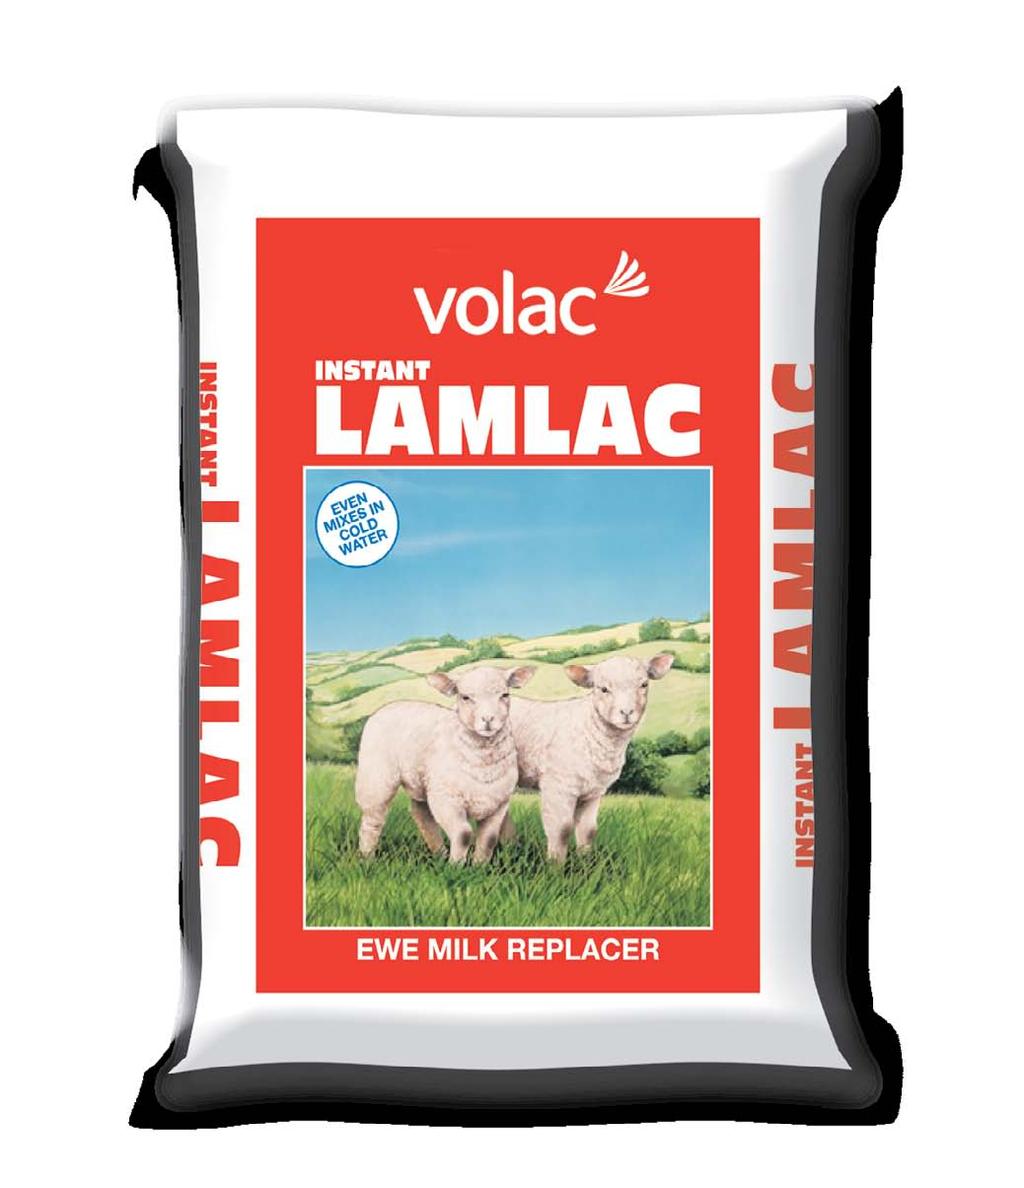 Benefits of Lamlac Concentrated milk protein. Highly digestible for faster growth. Ultrafiltrated milk protein. Natural health protection with less risk of nutritional upsets. Instantised.